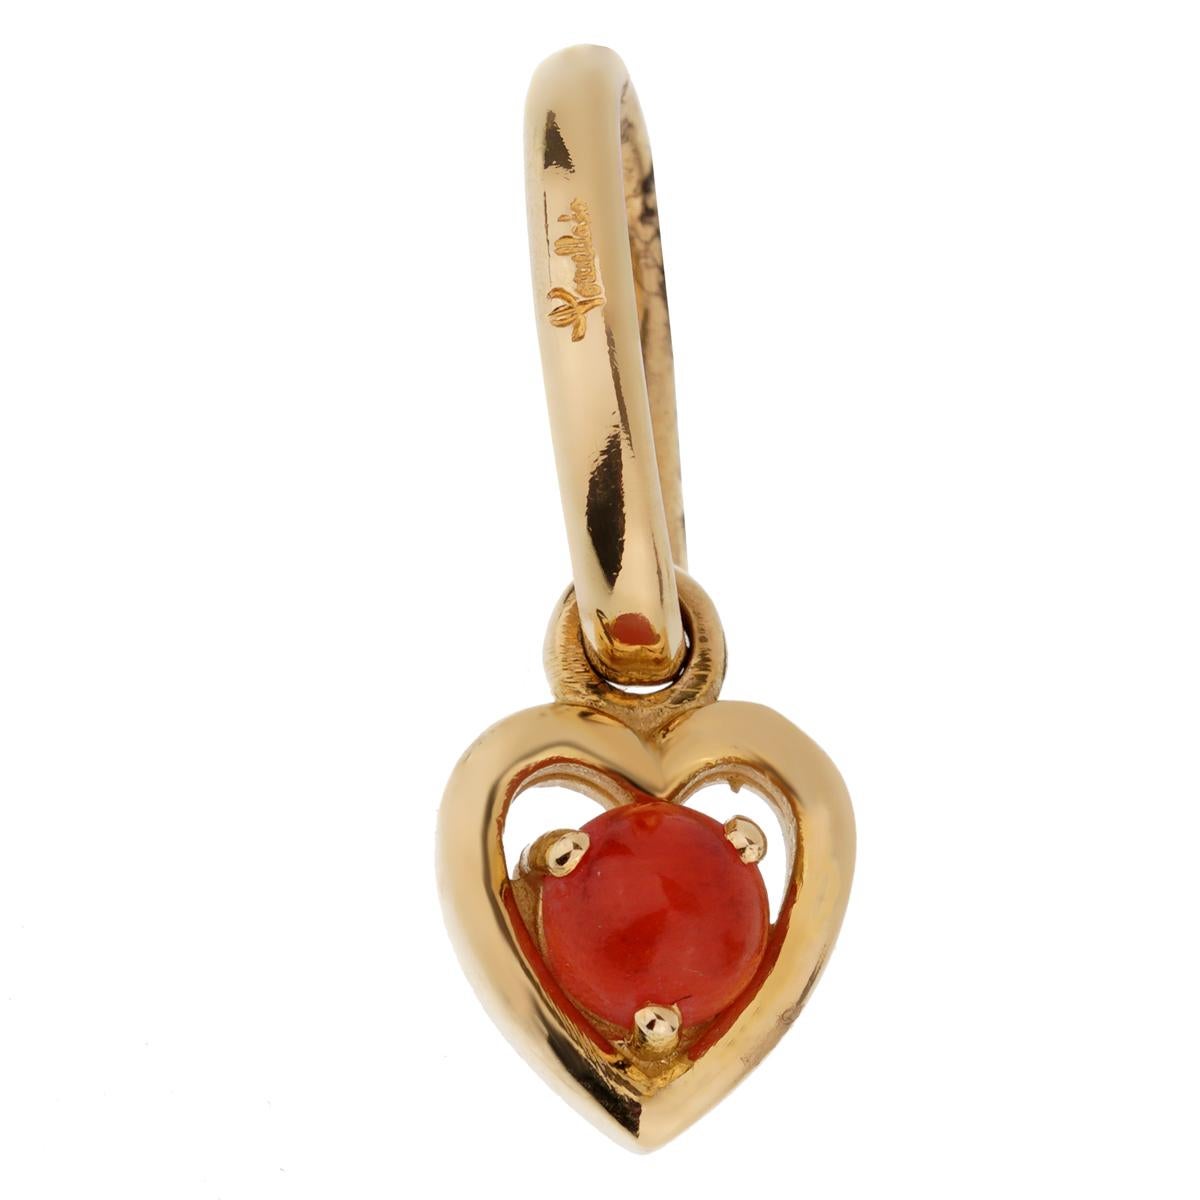 A chic brand new Pomellato charm pendant featuring a .28ct Red Coral set in 18k yellow gold. 

Sku: 2223